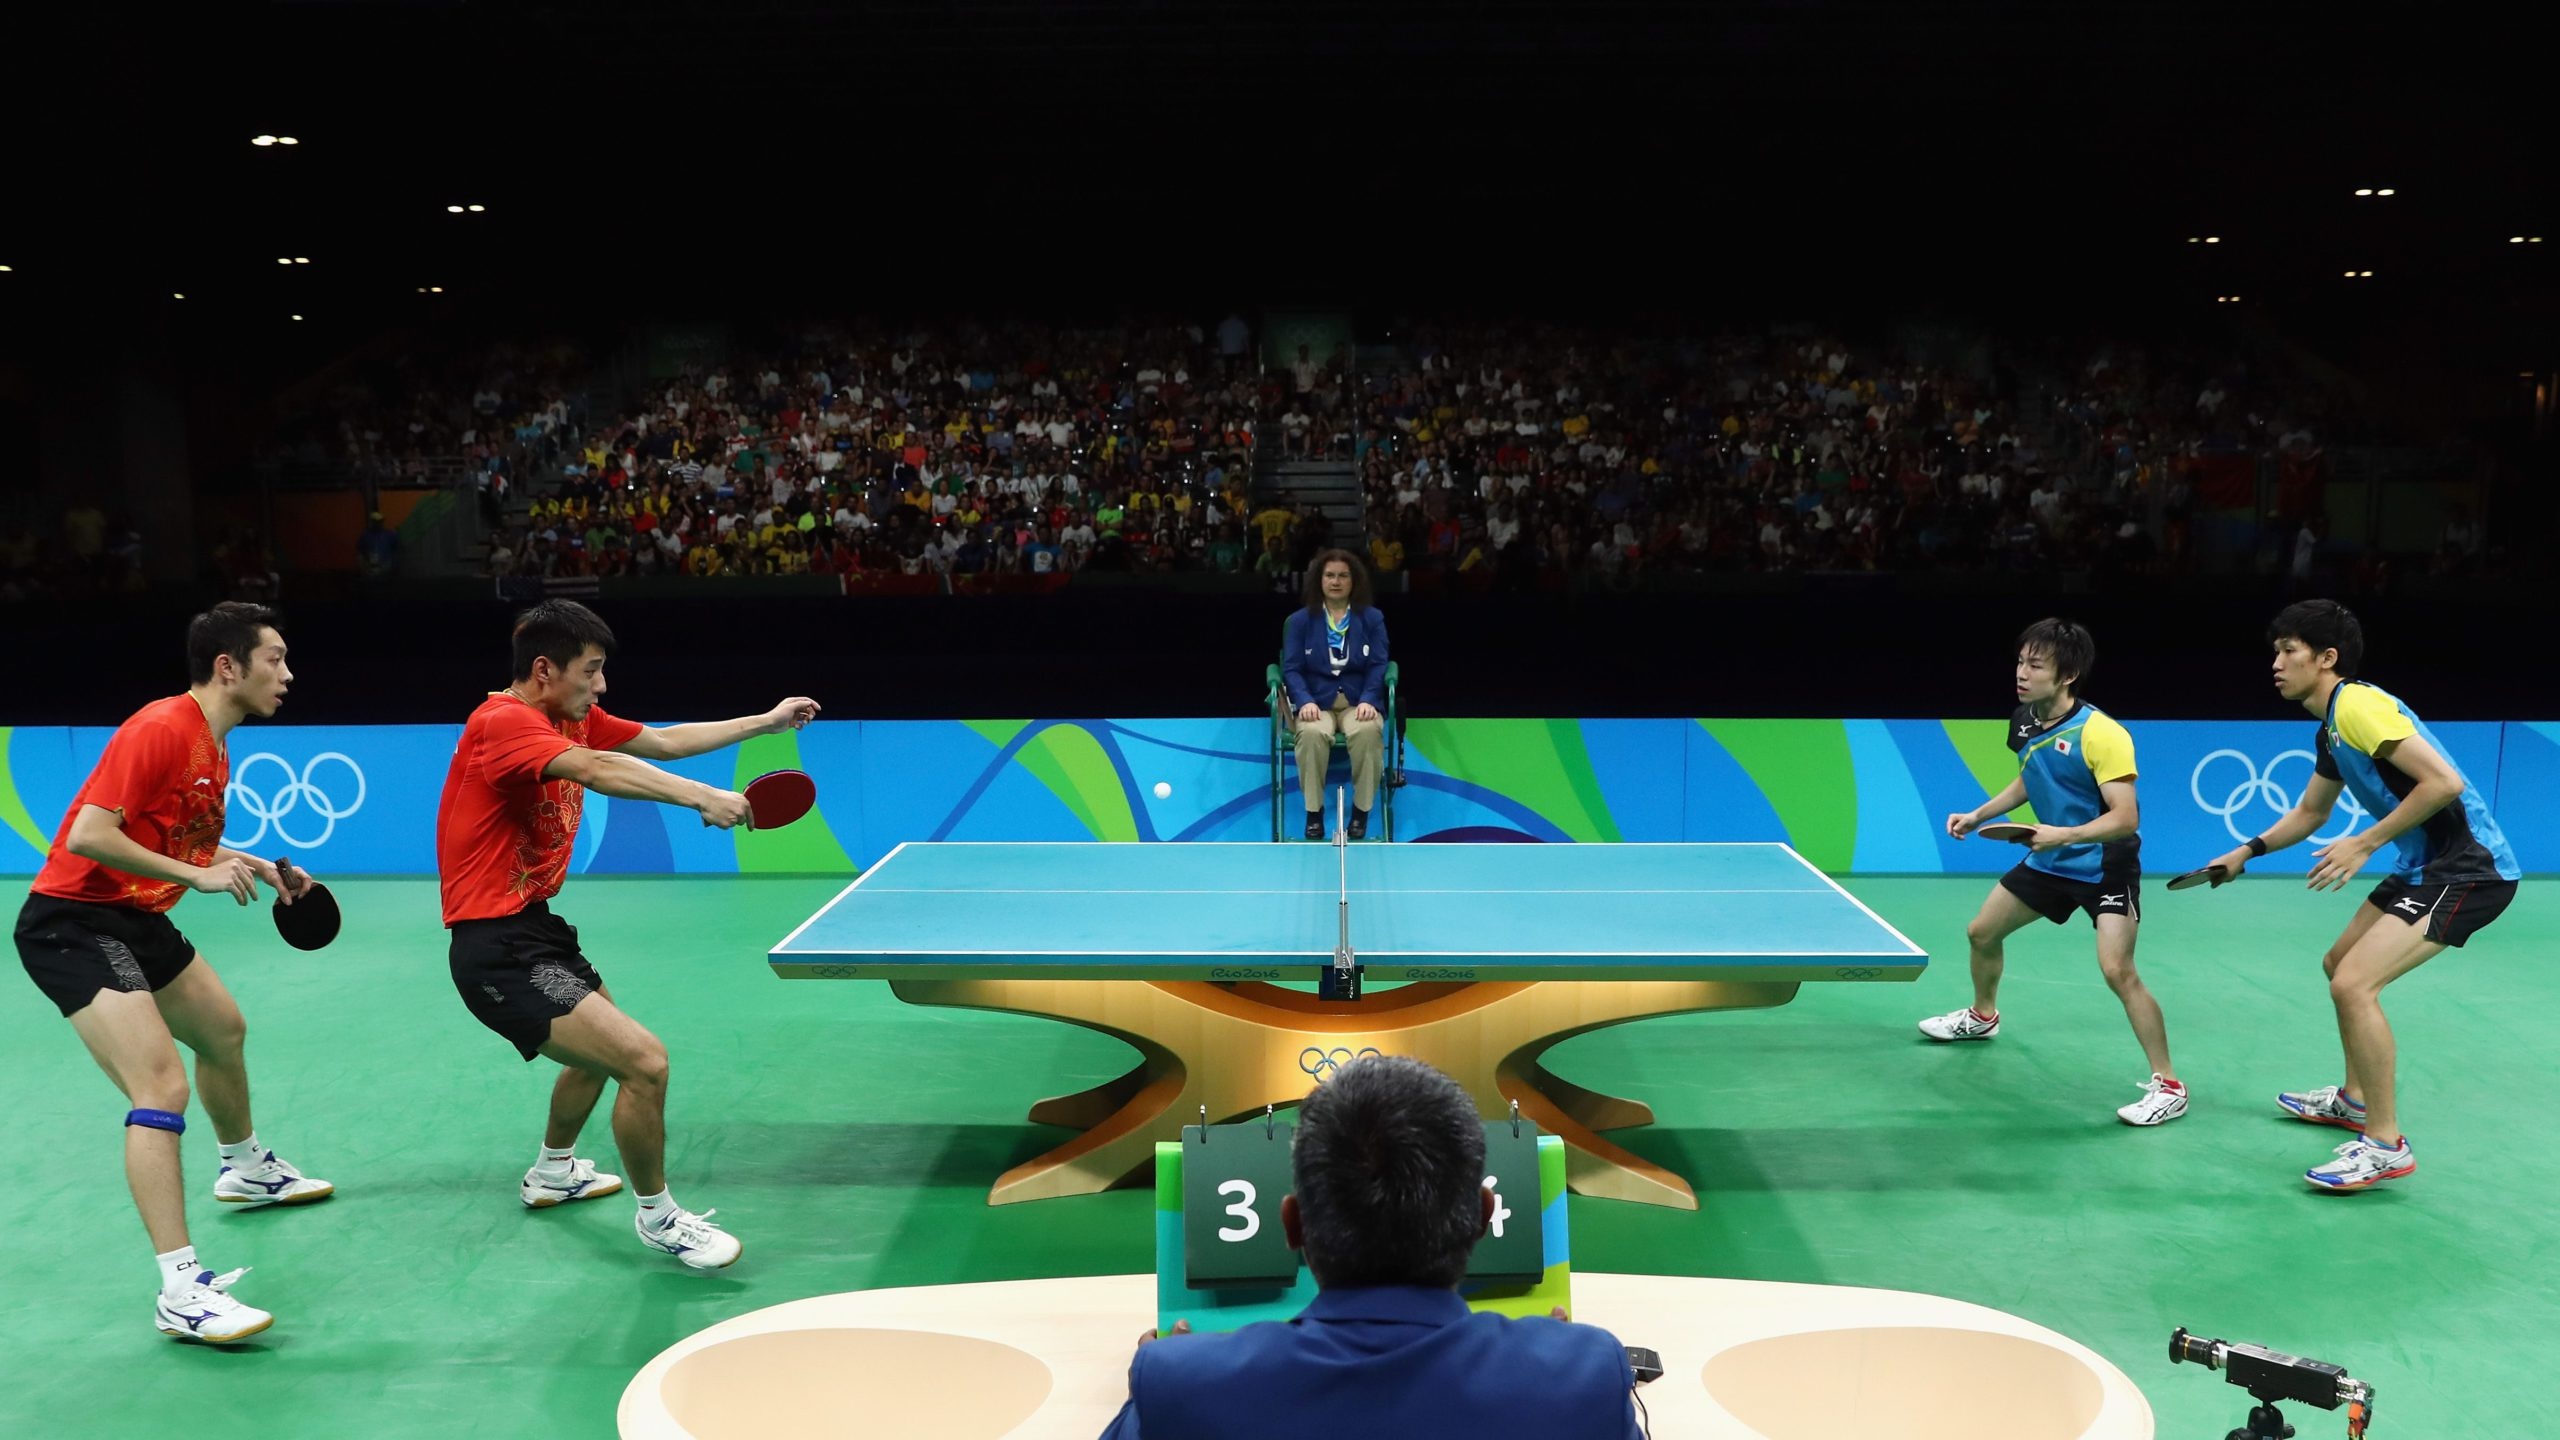 Table Tennis: Men's doubles and team ping-pong event, Tokyo 2020 Summer Olympics. 2560x1440 HD Wallpaper.